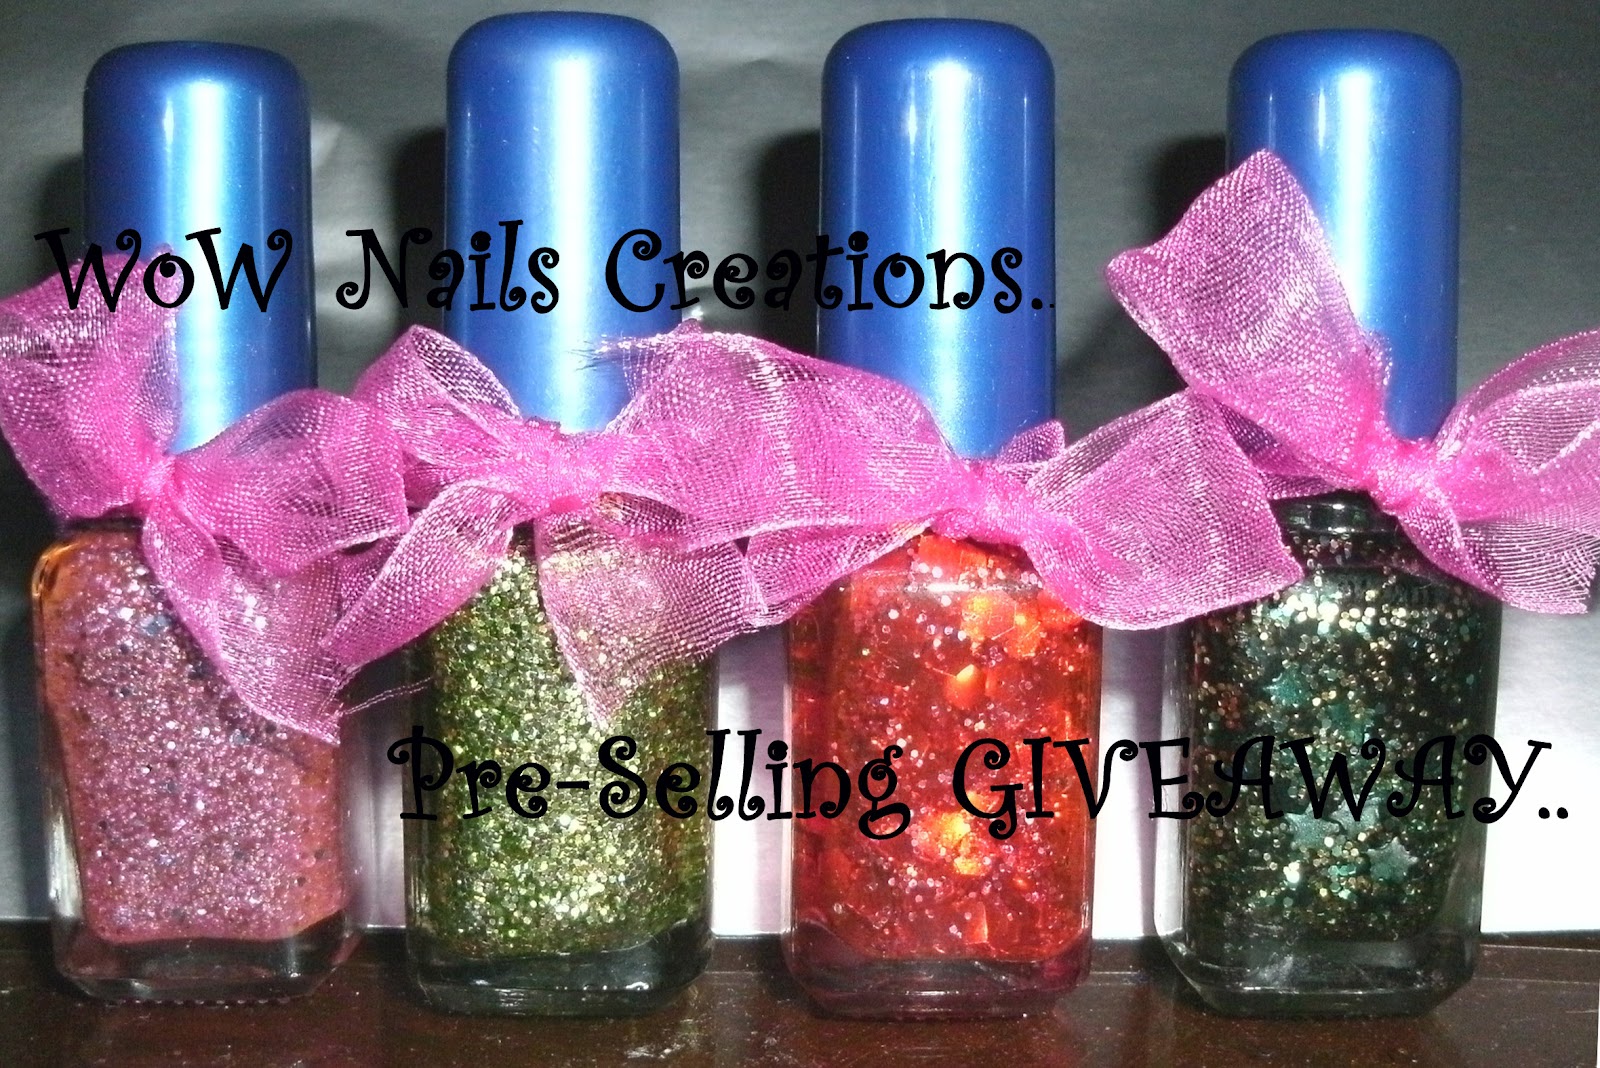 WOW Nails Giveaway